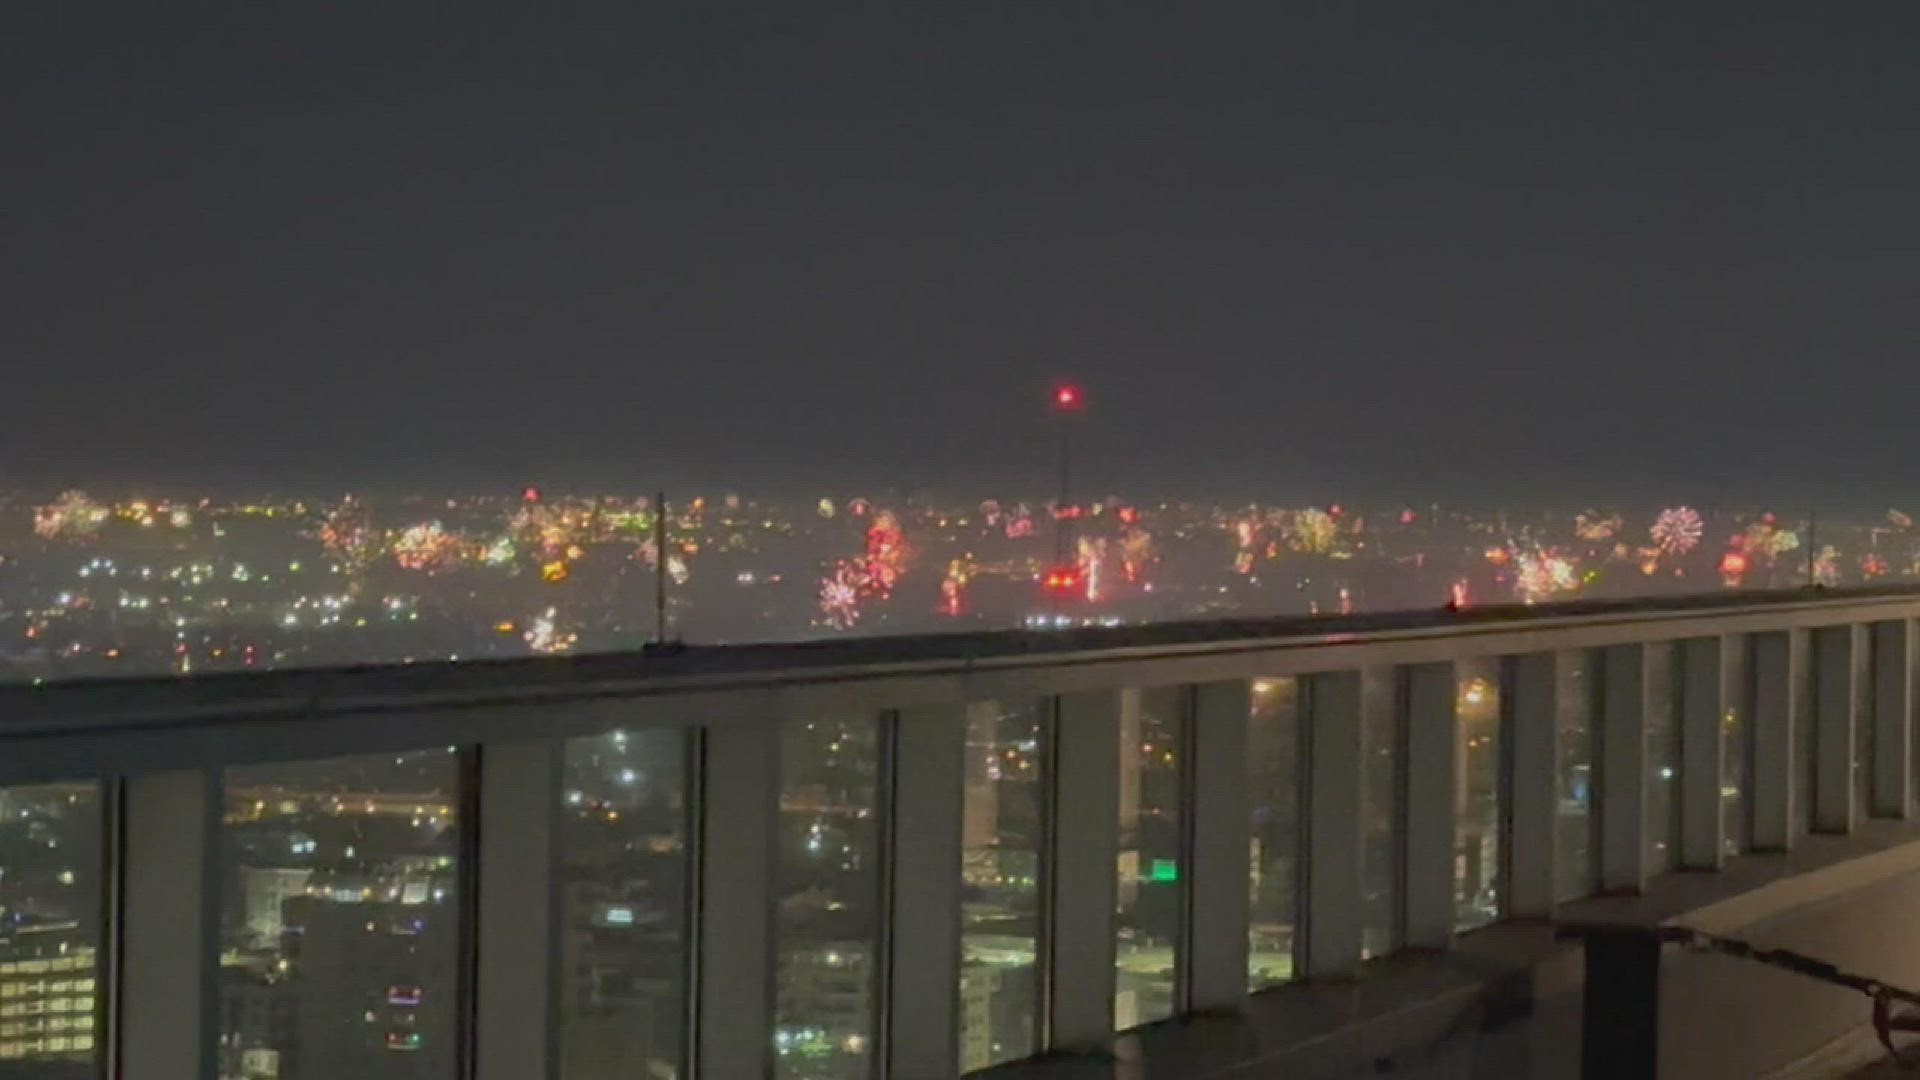 Amazing display of fireworks in downtown SA from the 32nd floor of the Azteca Condos.